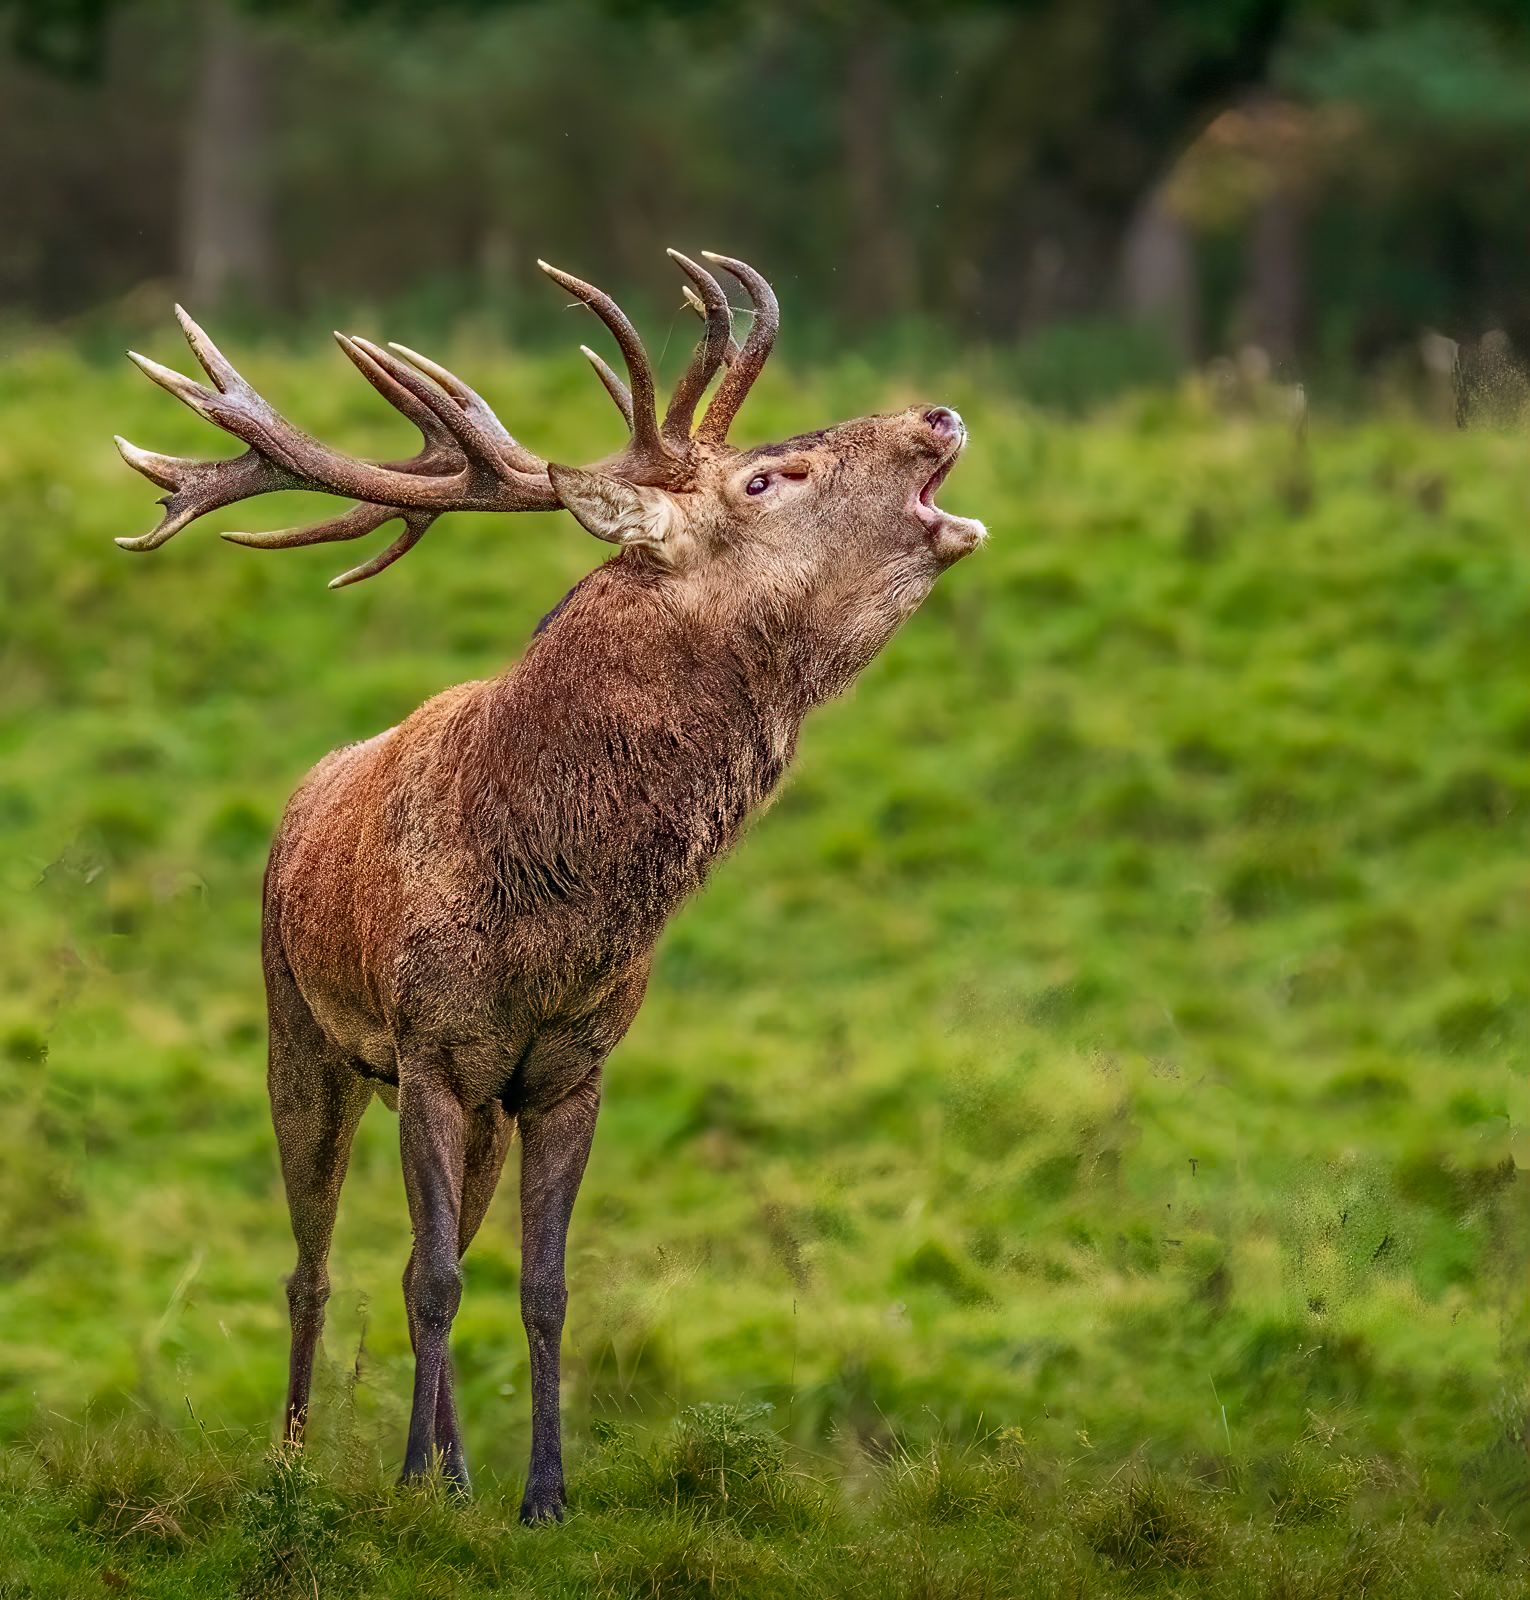 huge brown animal with massive antlers looking to the left